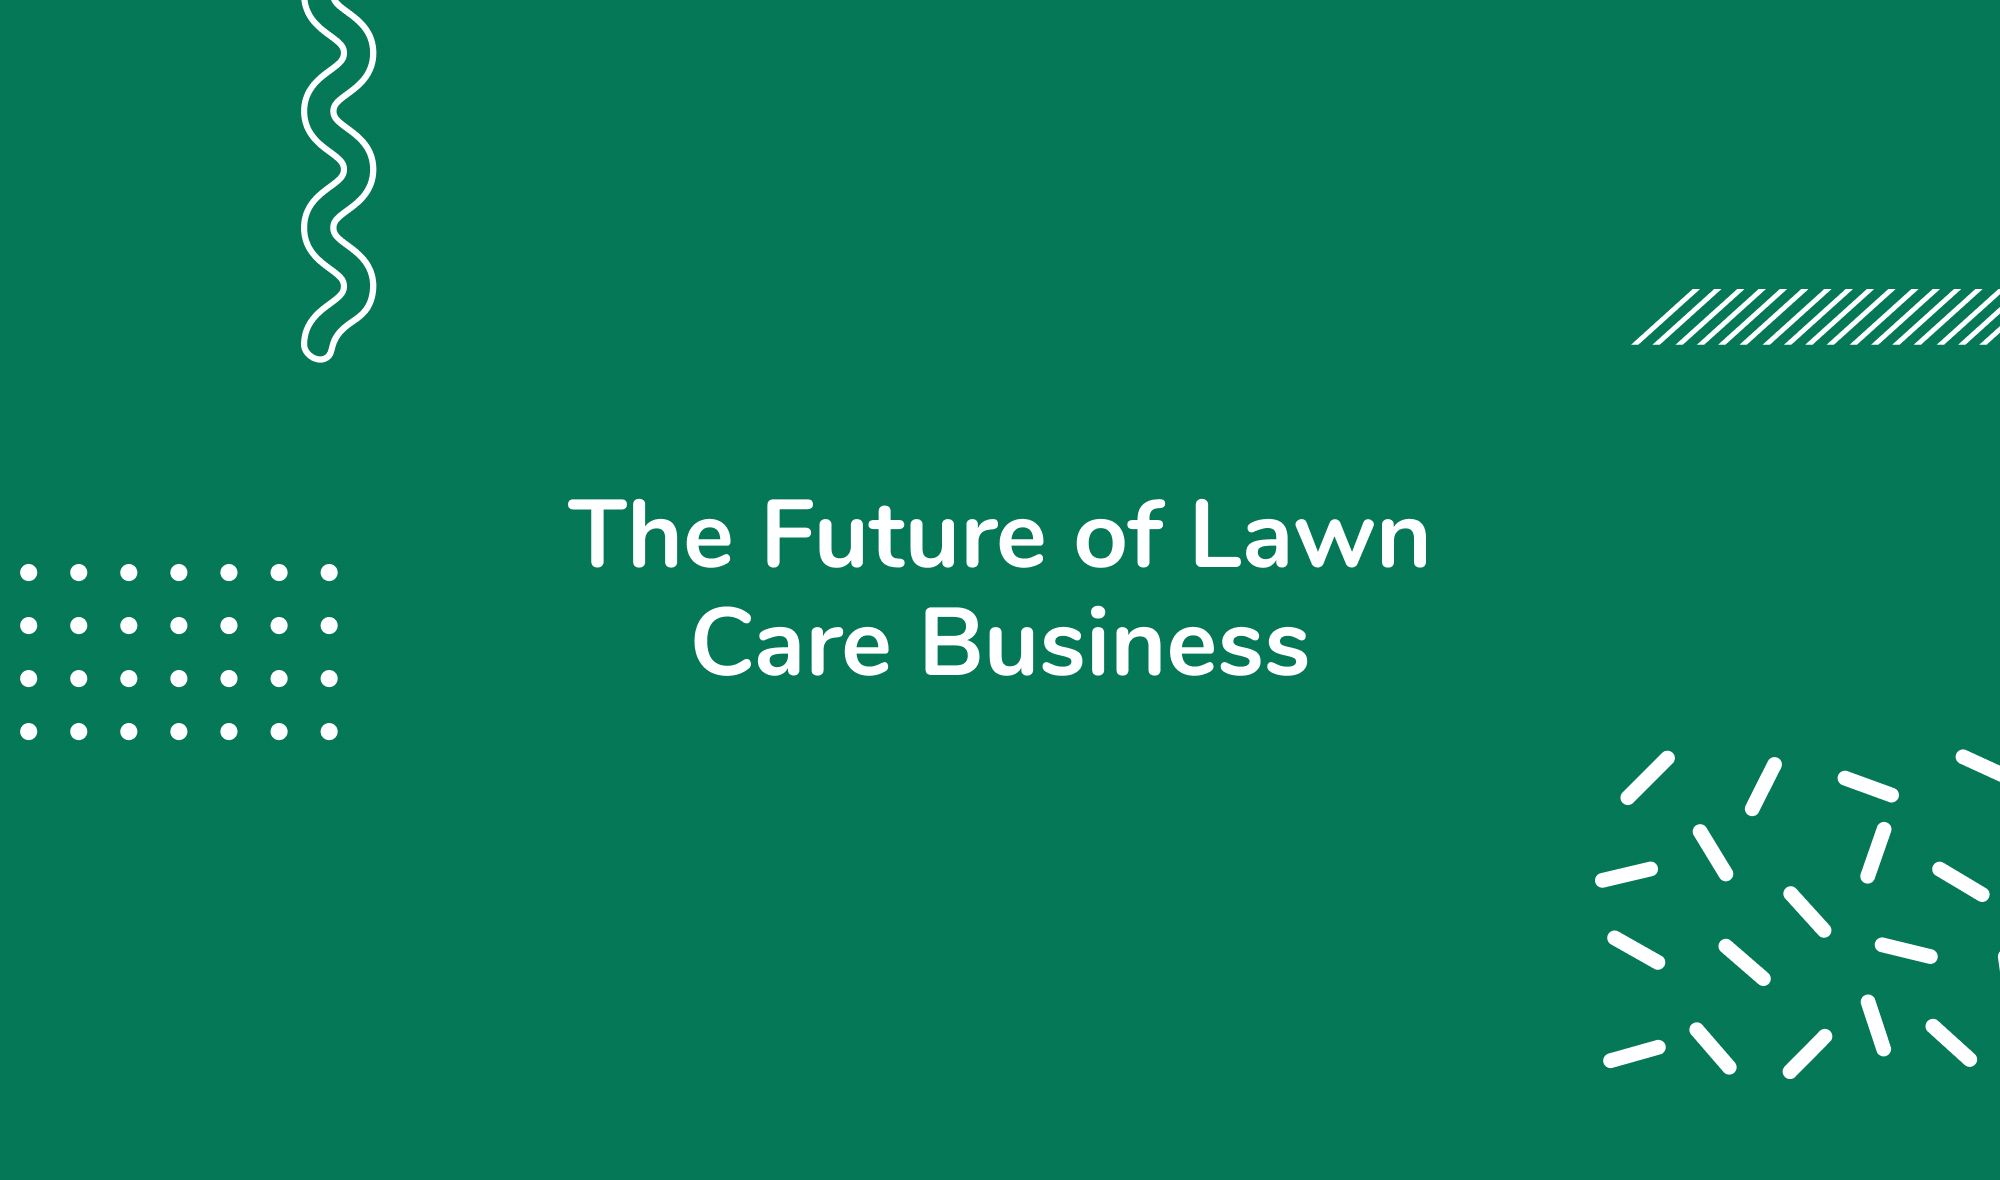 The Future of Lawn Care Business